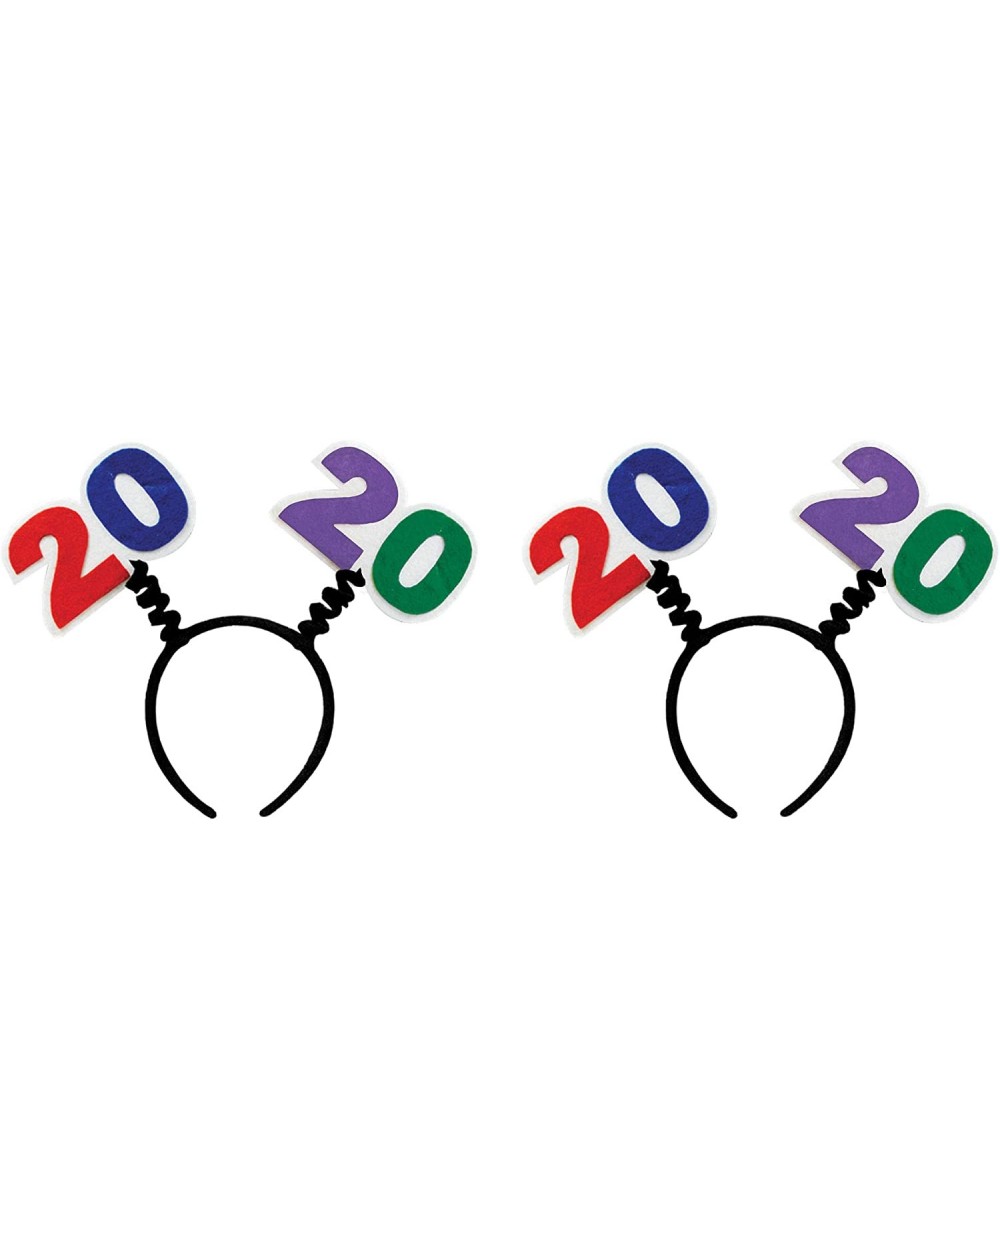 Streamers 2020 Boppers 2 Piece- One Size- Multicolored - CA18RM0A4Y8 $10.57